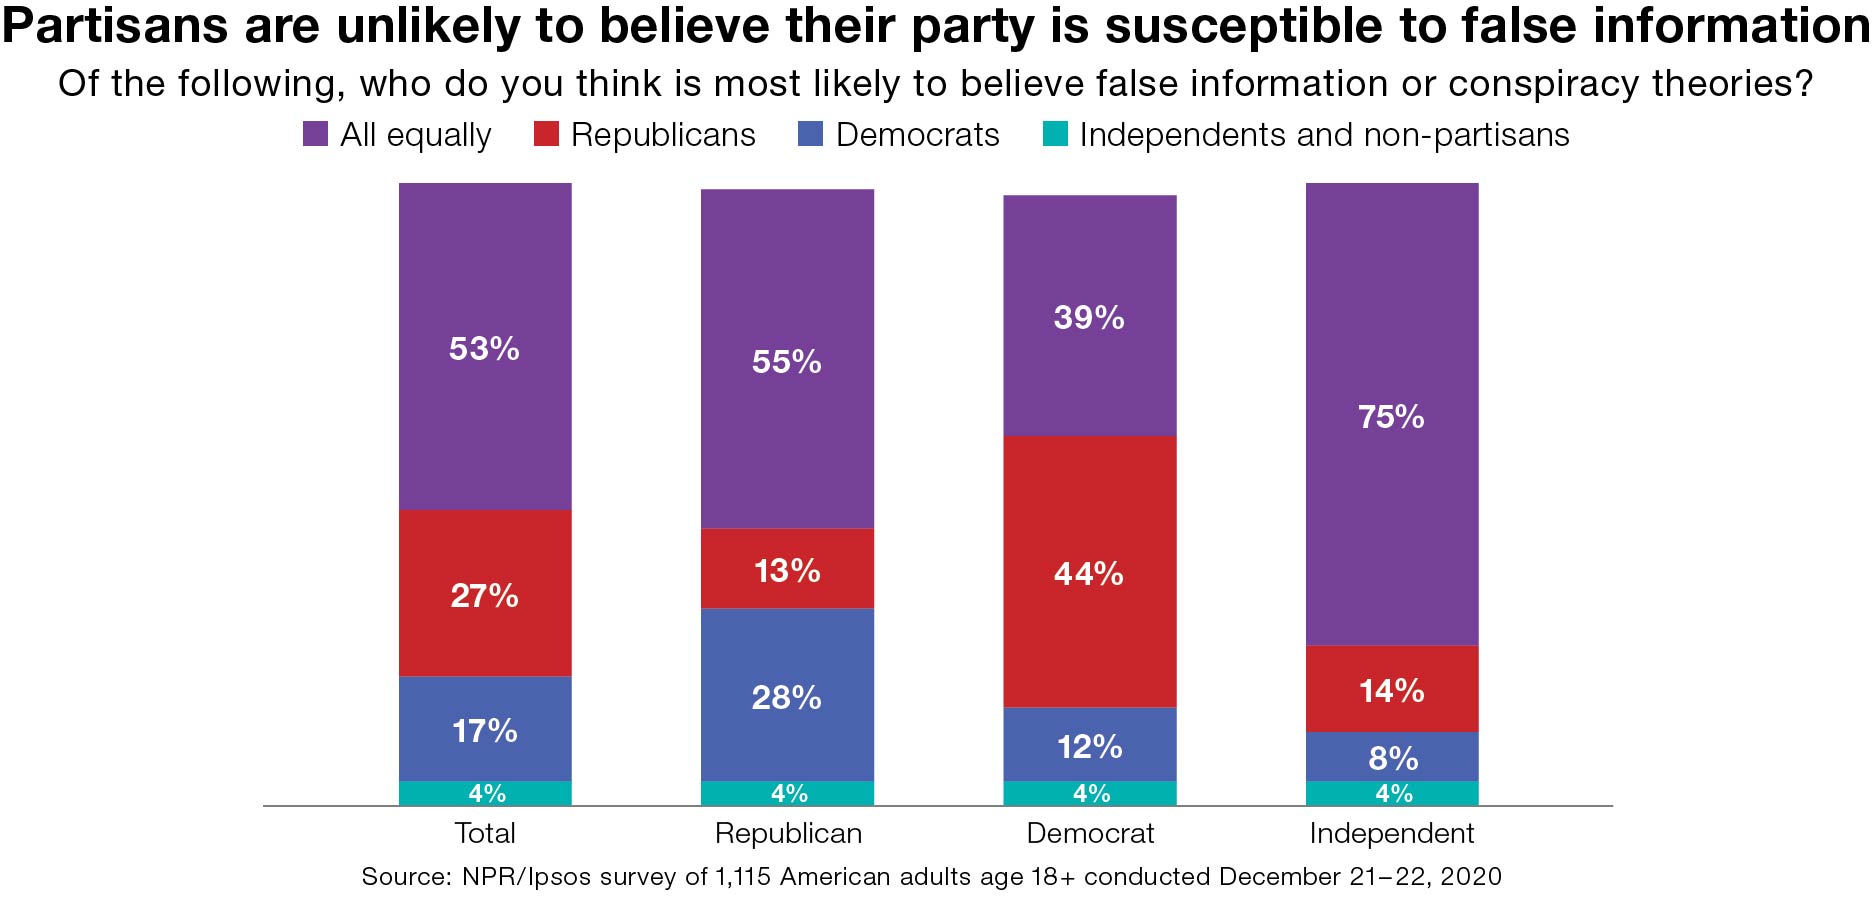 Partisans are unlikely to believe their party is susceptible to false information